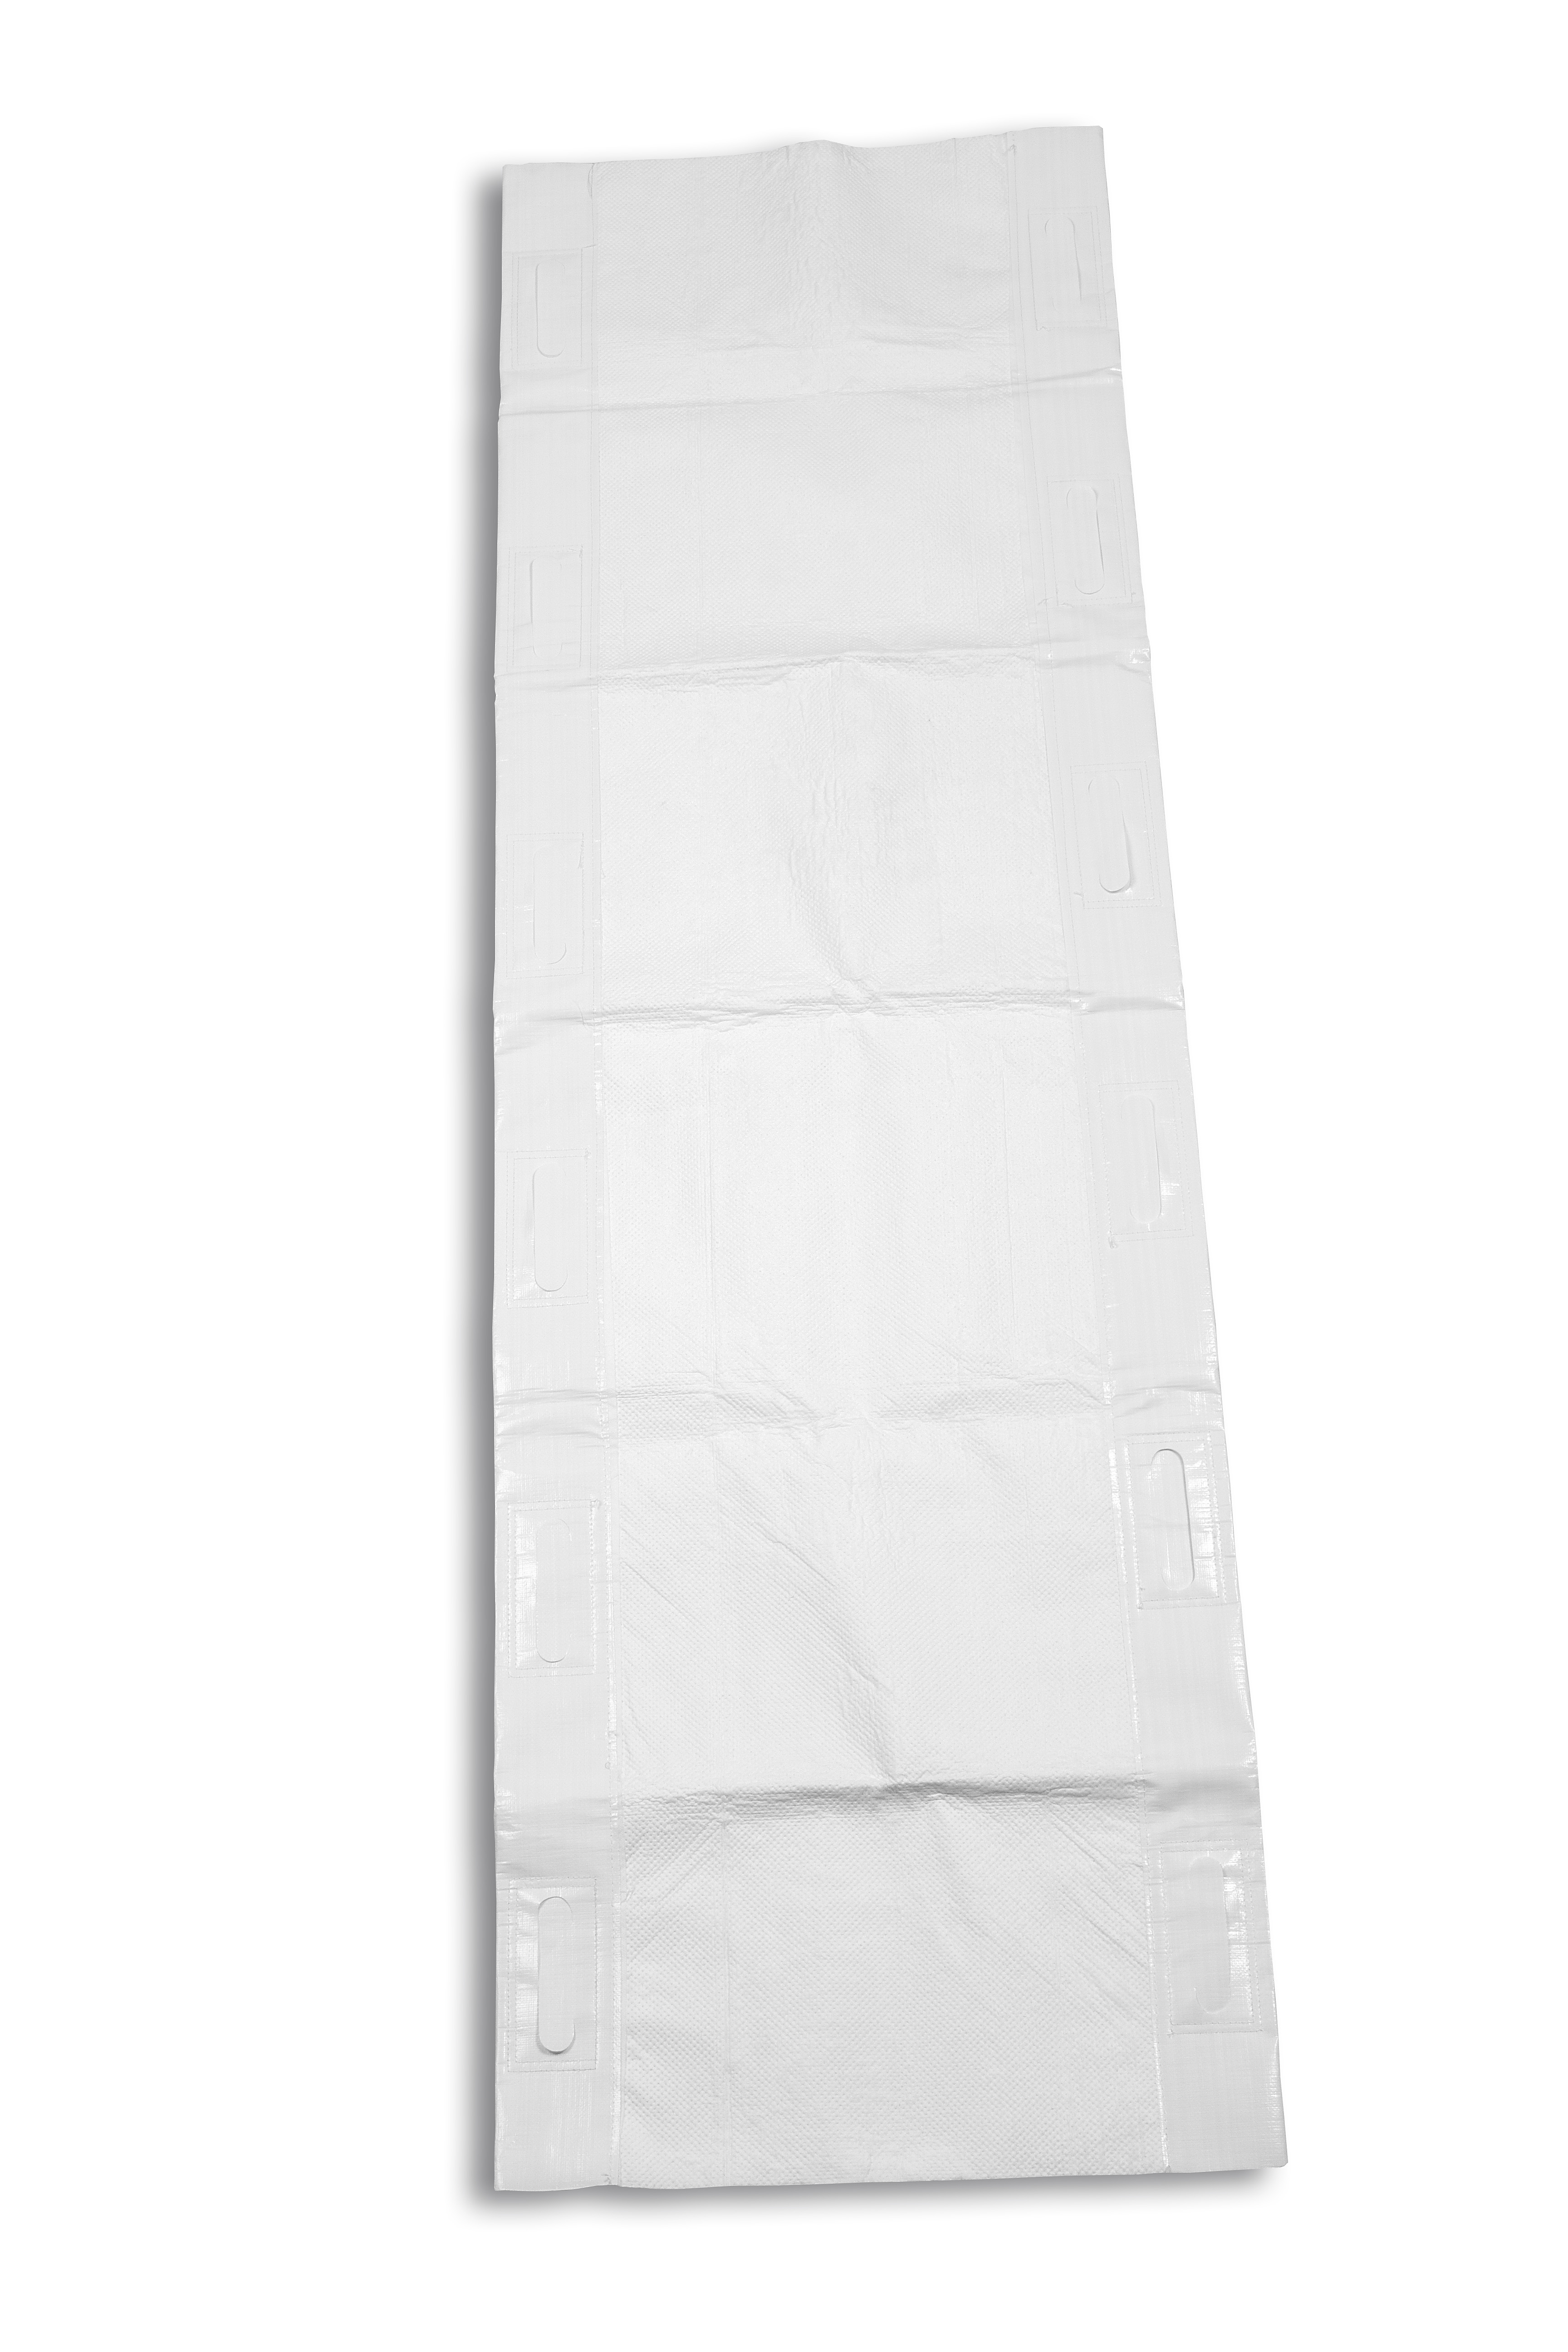 Disposable Carry Sheet, white, with an absorbent core, DIN EN 1865, with 12 Handels, only for transfer, extra strong laminated, tearproof, water resistant, individually packed, only for single use

Material:
Polyester, Nylon Size: 200 x 70 cm
Unit: 24 pcs./ctn – 20 VE/Pallet
Cartonsize: 60x40x40 cm
Net weight: 17,30 kg Gross weight: 18,30 kg